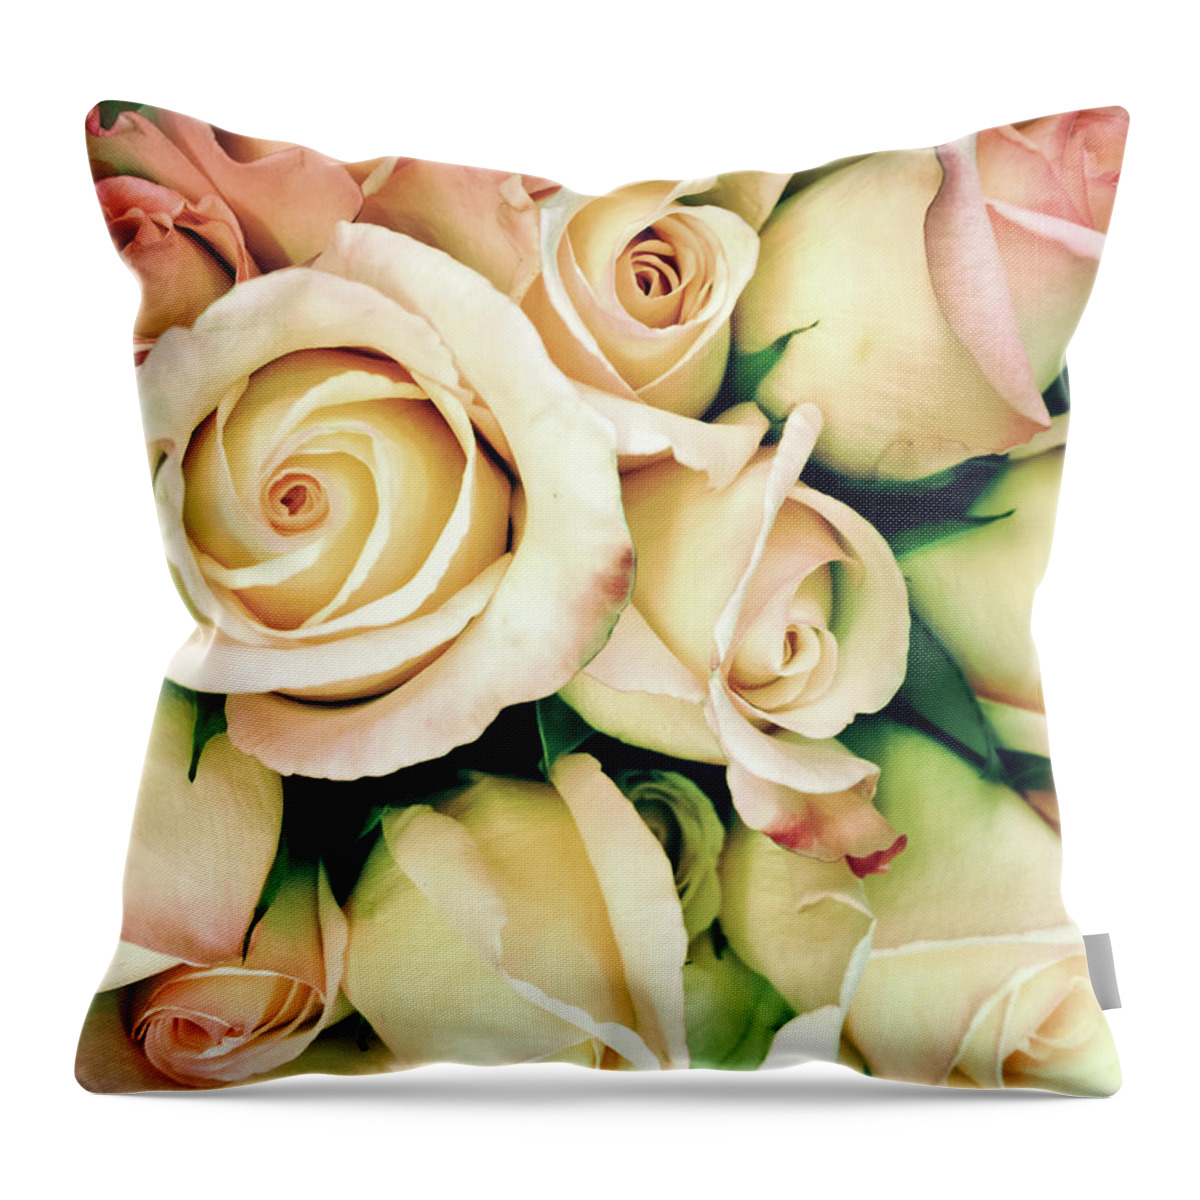 Petal Throw Pillow featuring the photograph Full Frame Cross Processed Rose Bouquet by Travelif